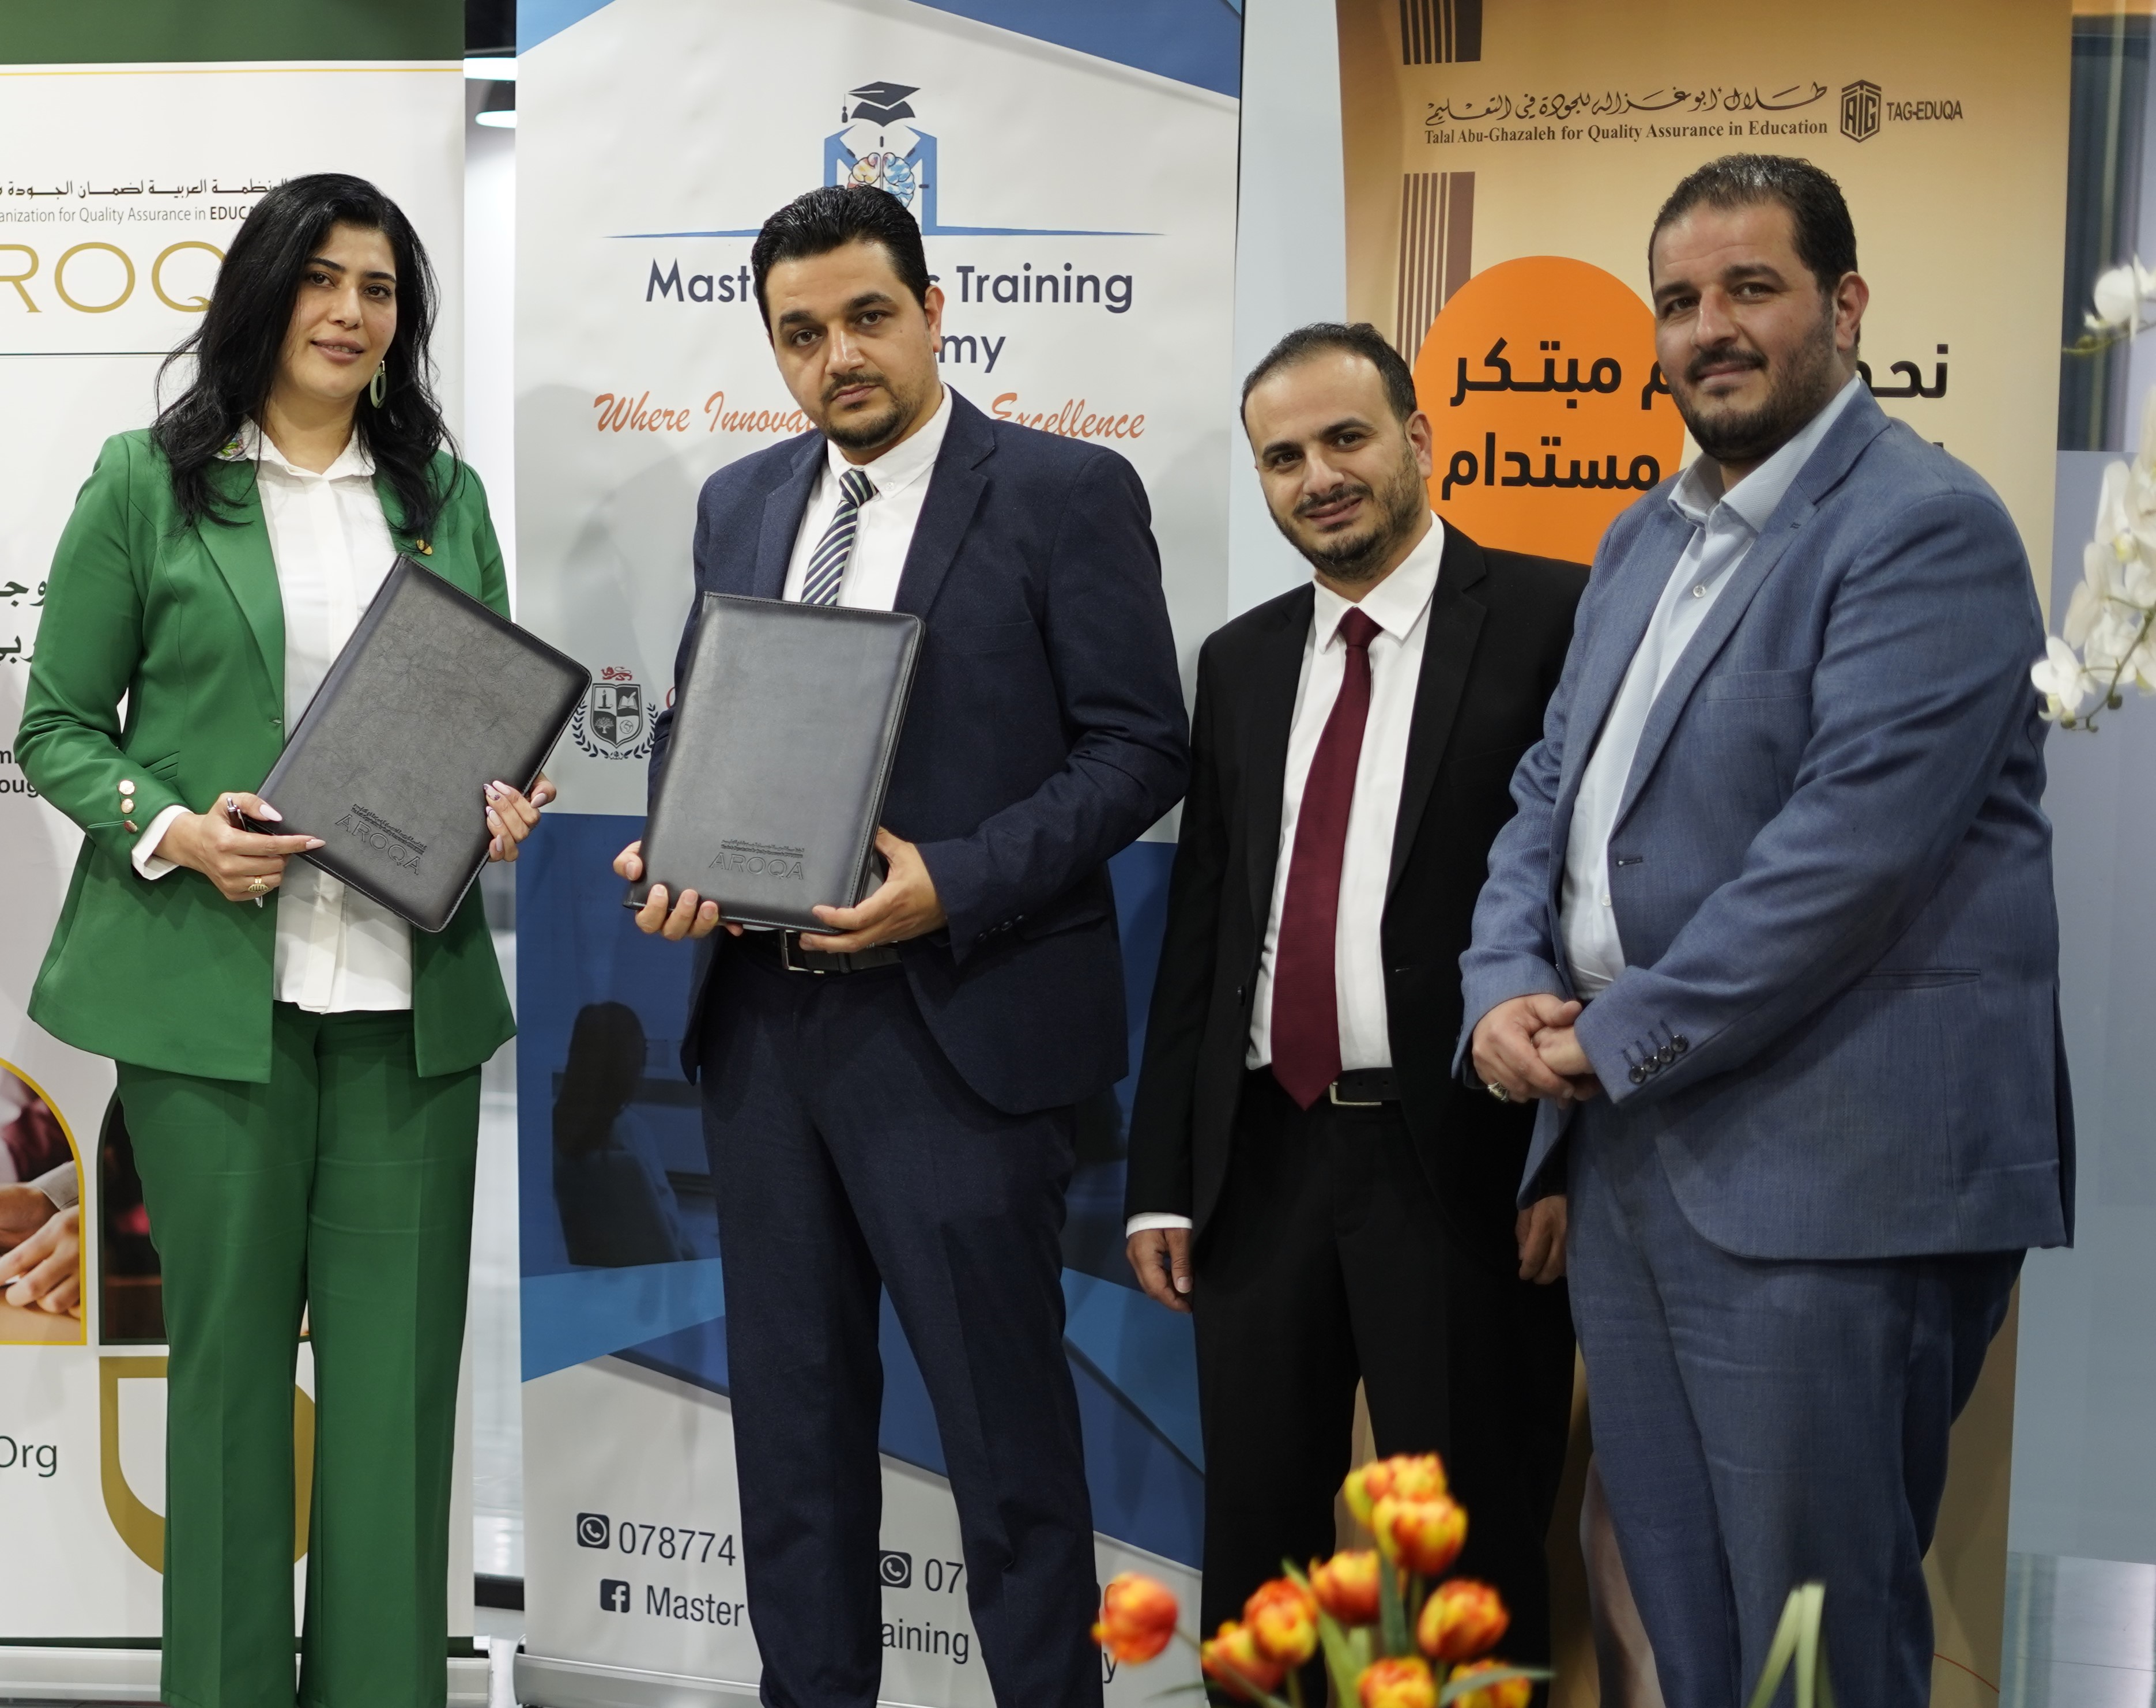 Dr. Abu-Ghazaleh: AROQA and Master Minds Cooperate to Develop Teachers’ Performance in International Programs